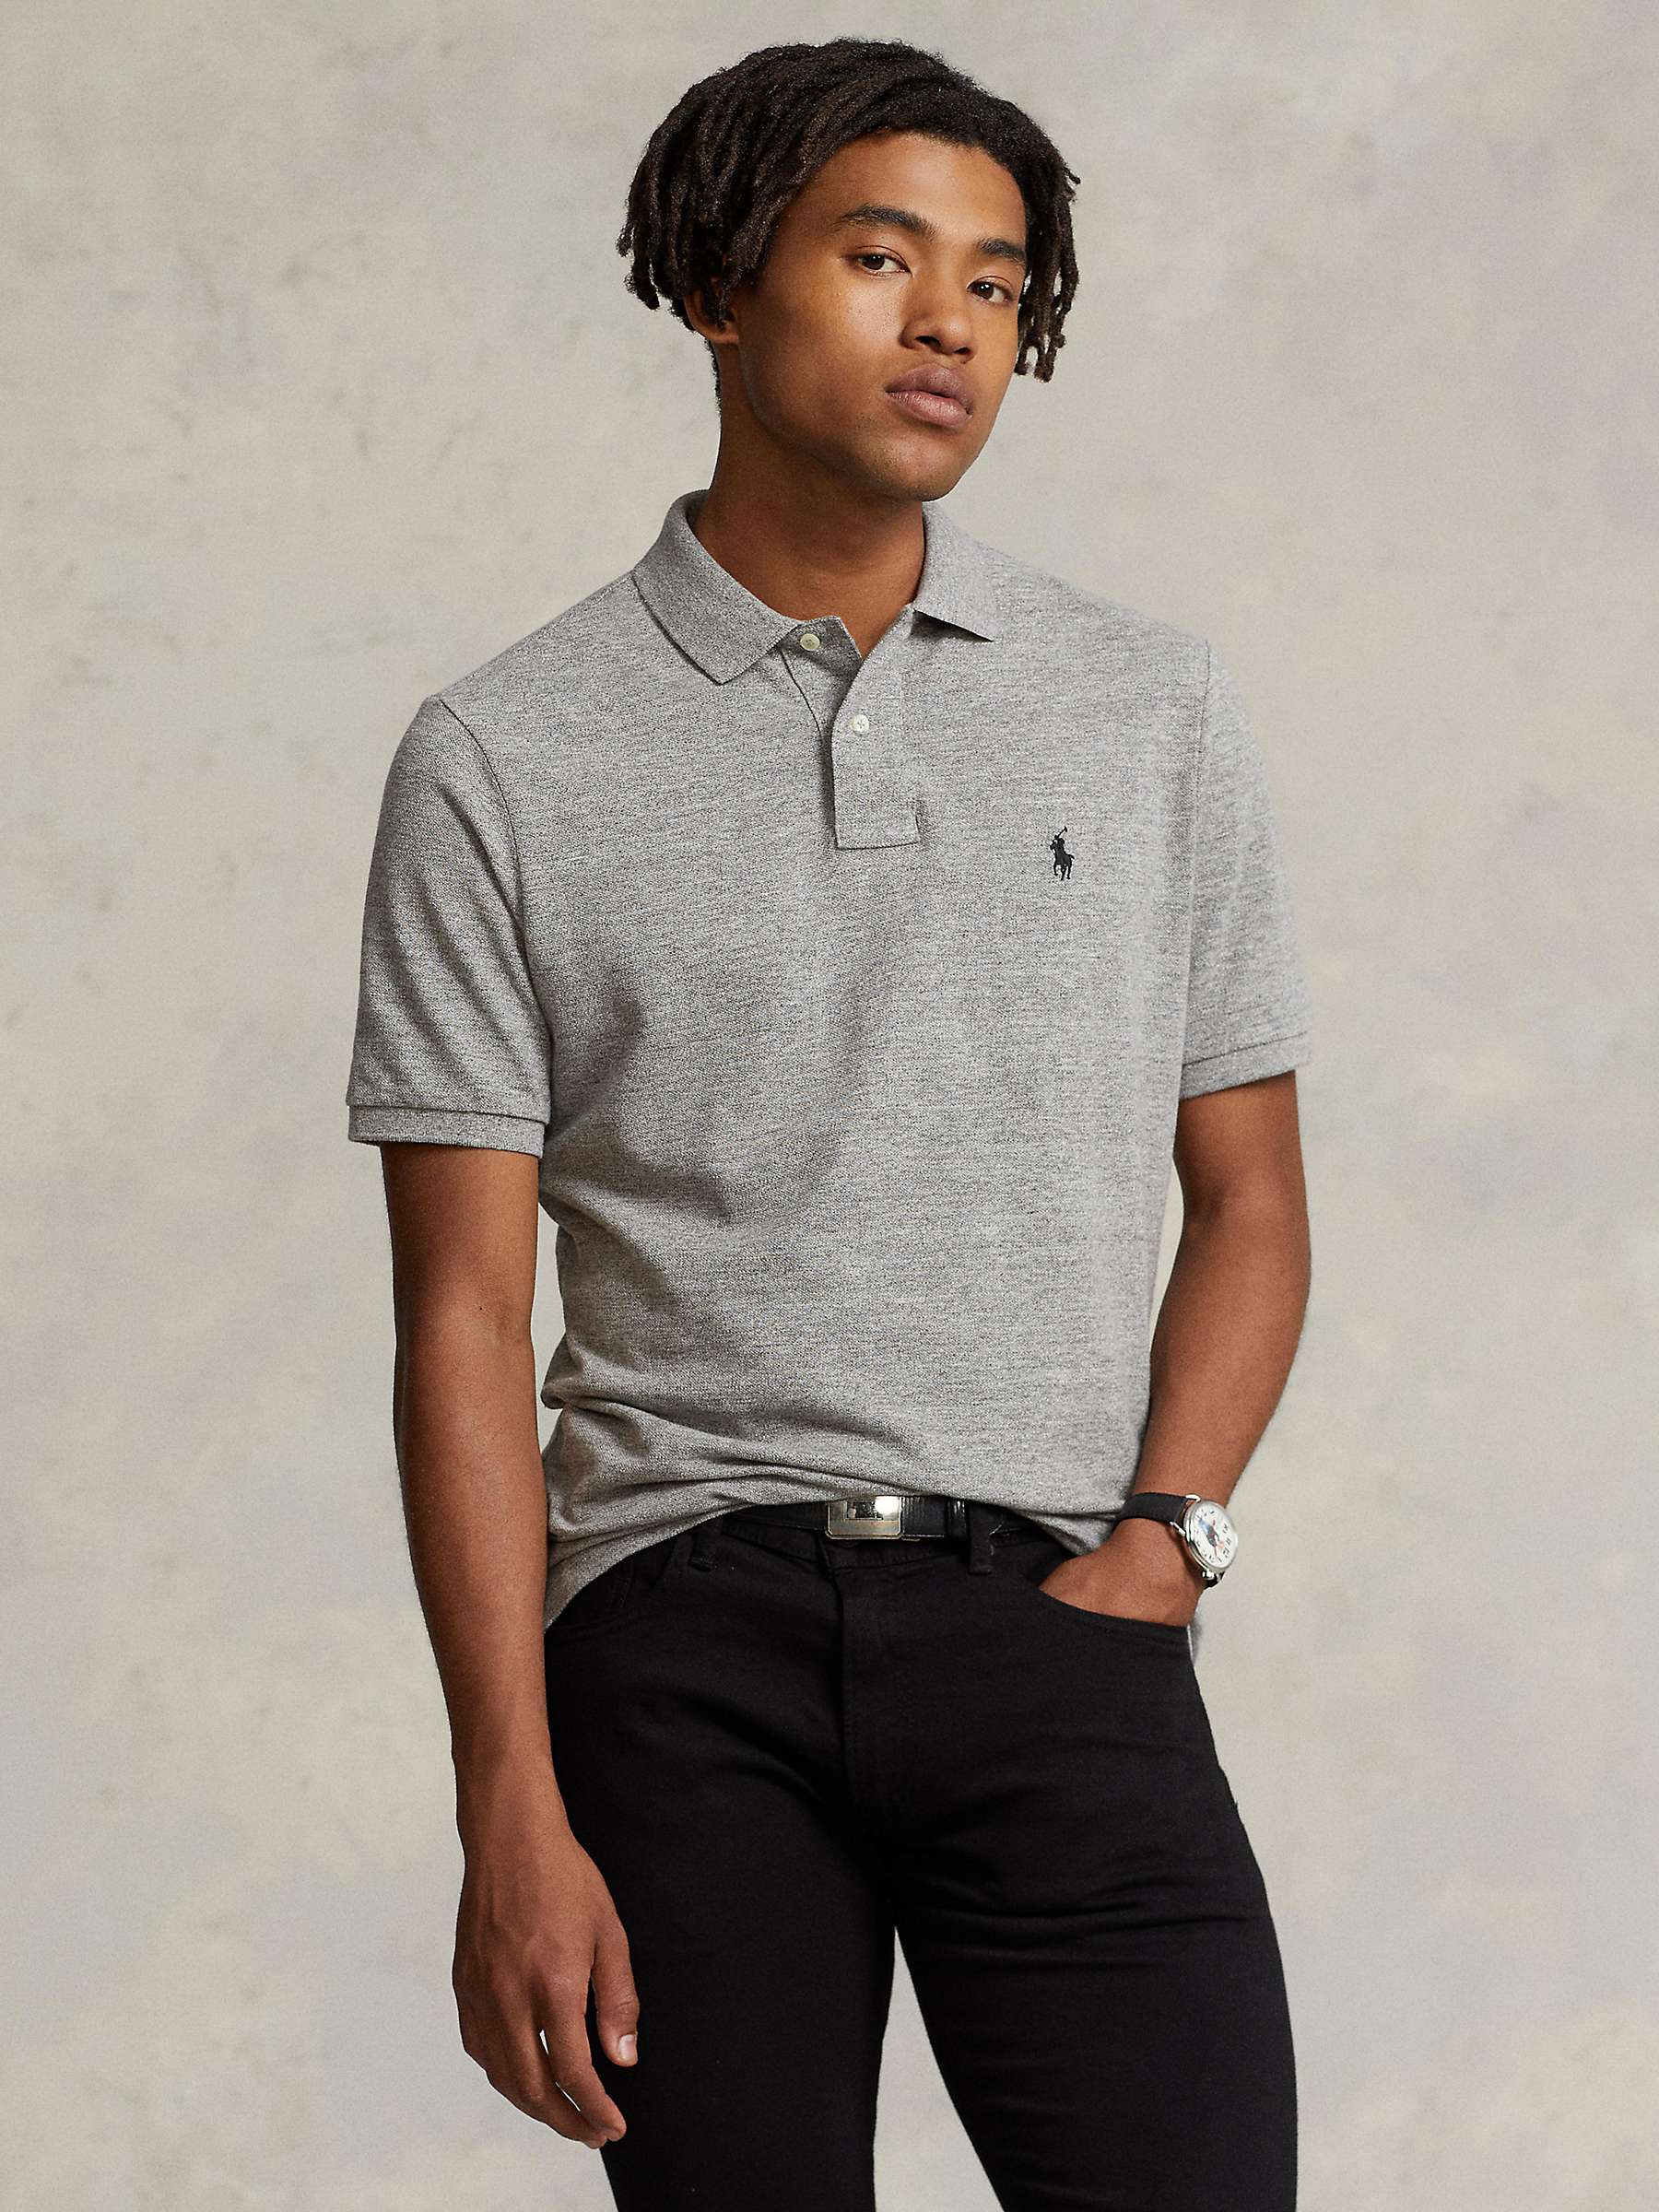 Buy Polo Ralph Lauren Slim Fit Polo Top, Canterbury Heather Online at johnlewis.com